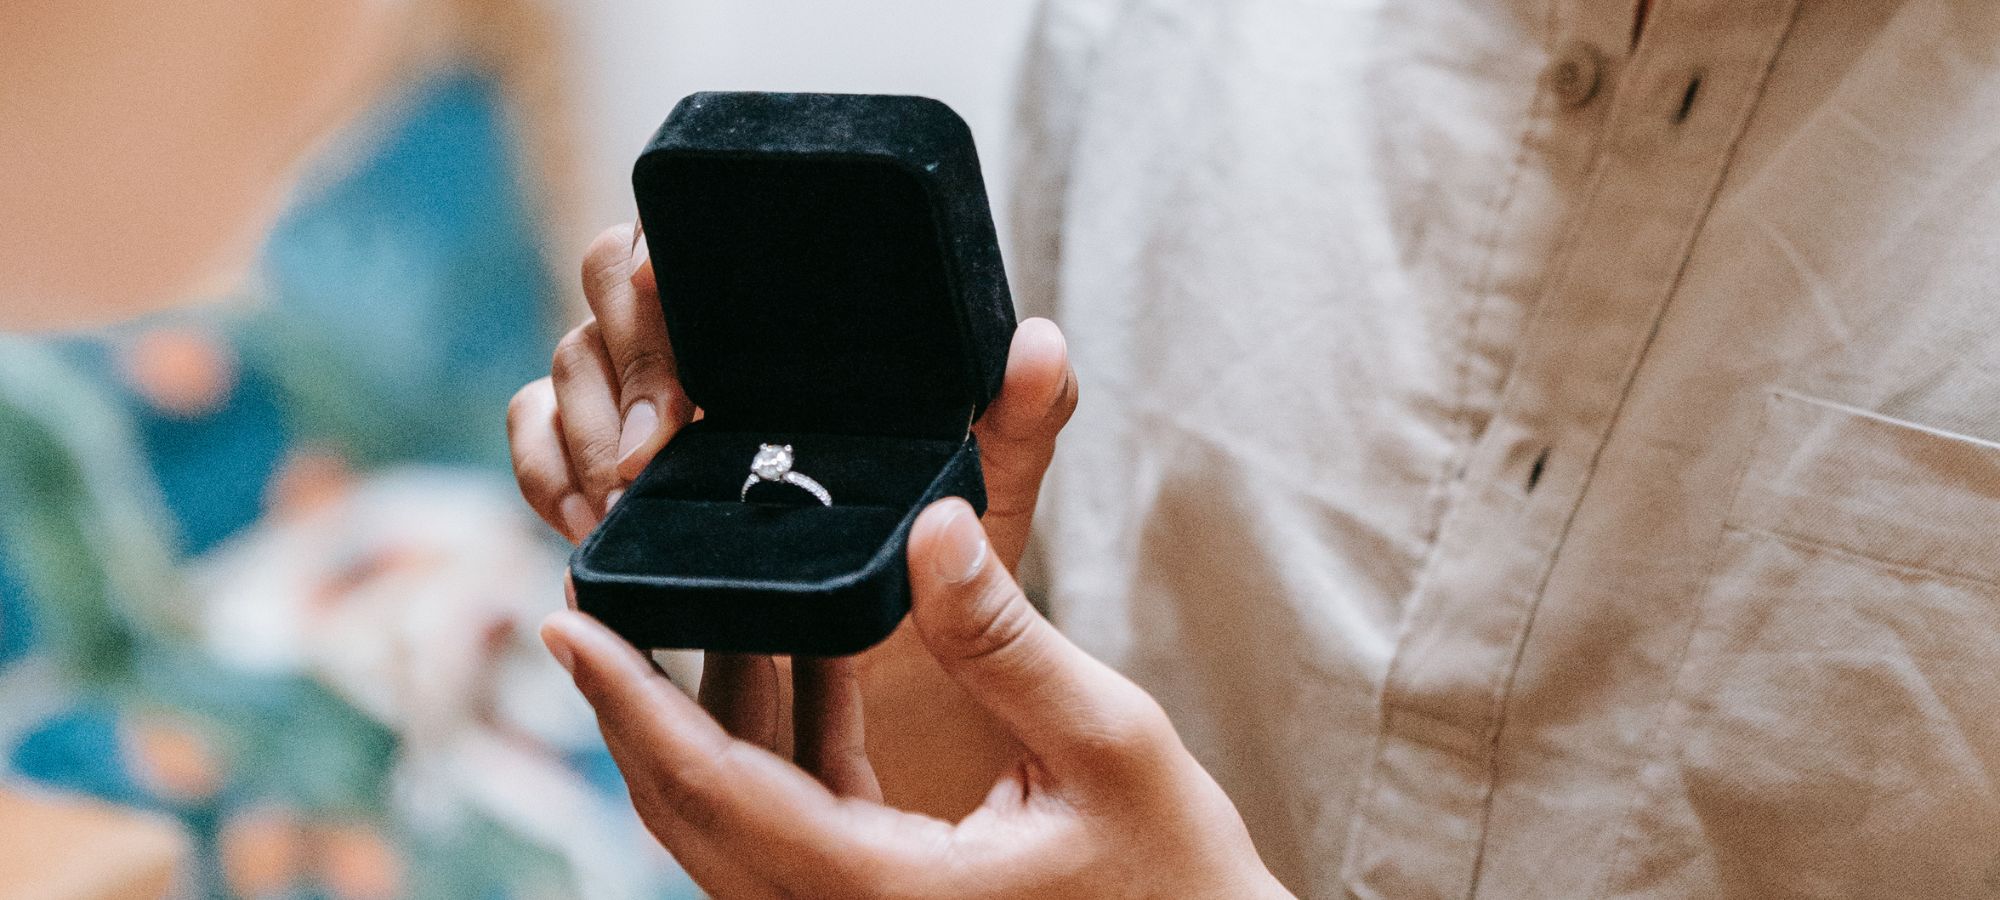 How to plan the perfect proposal